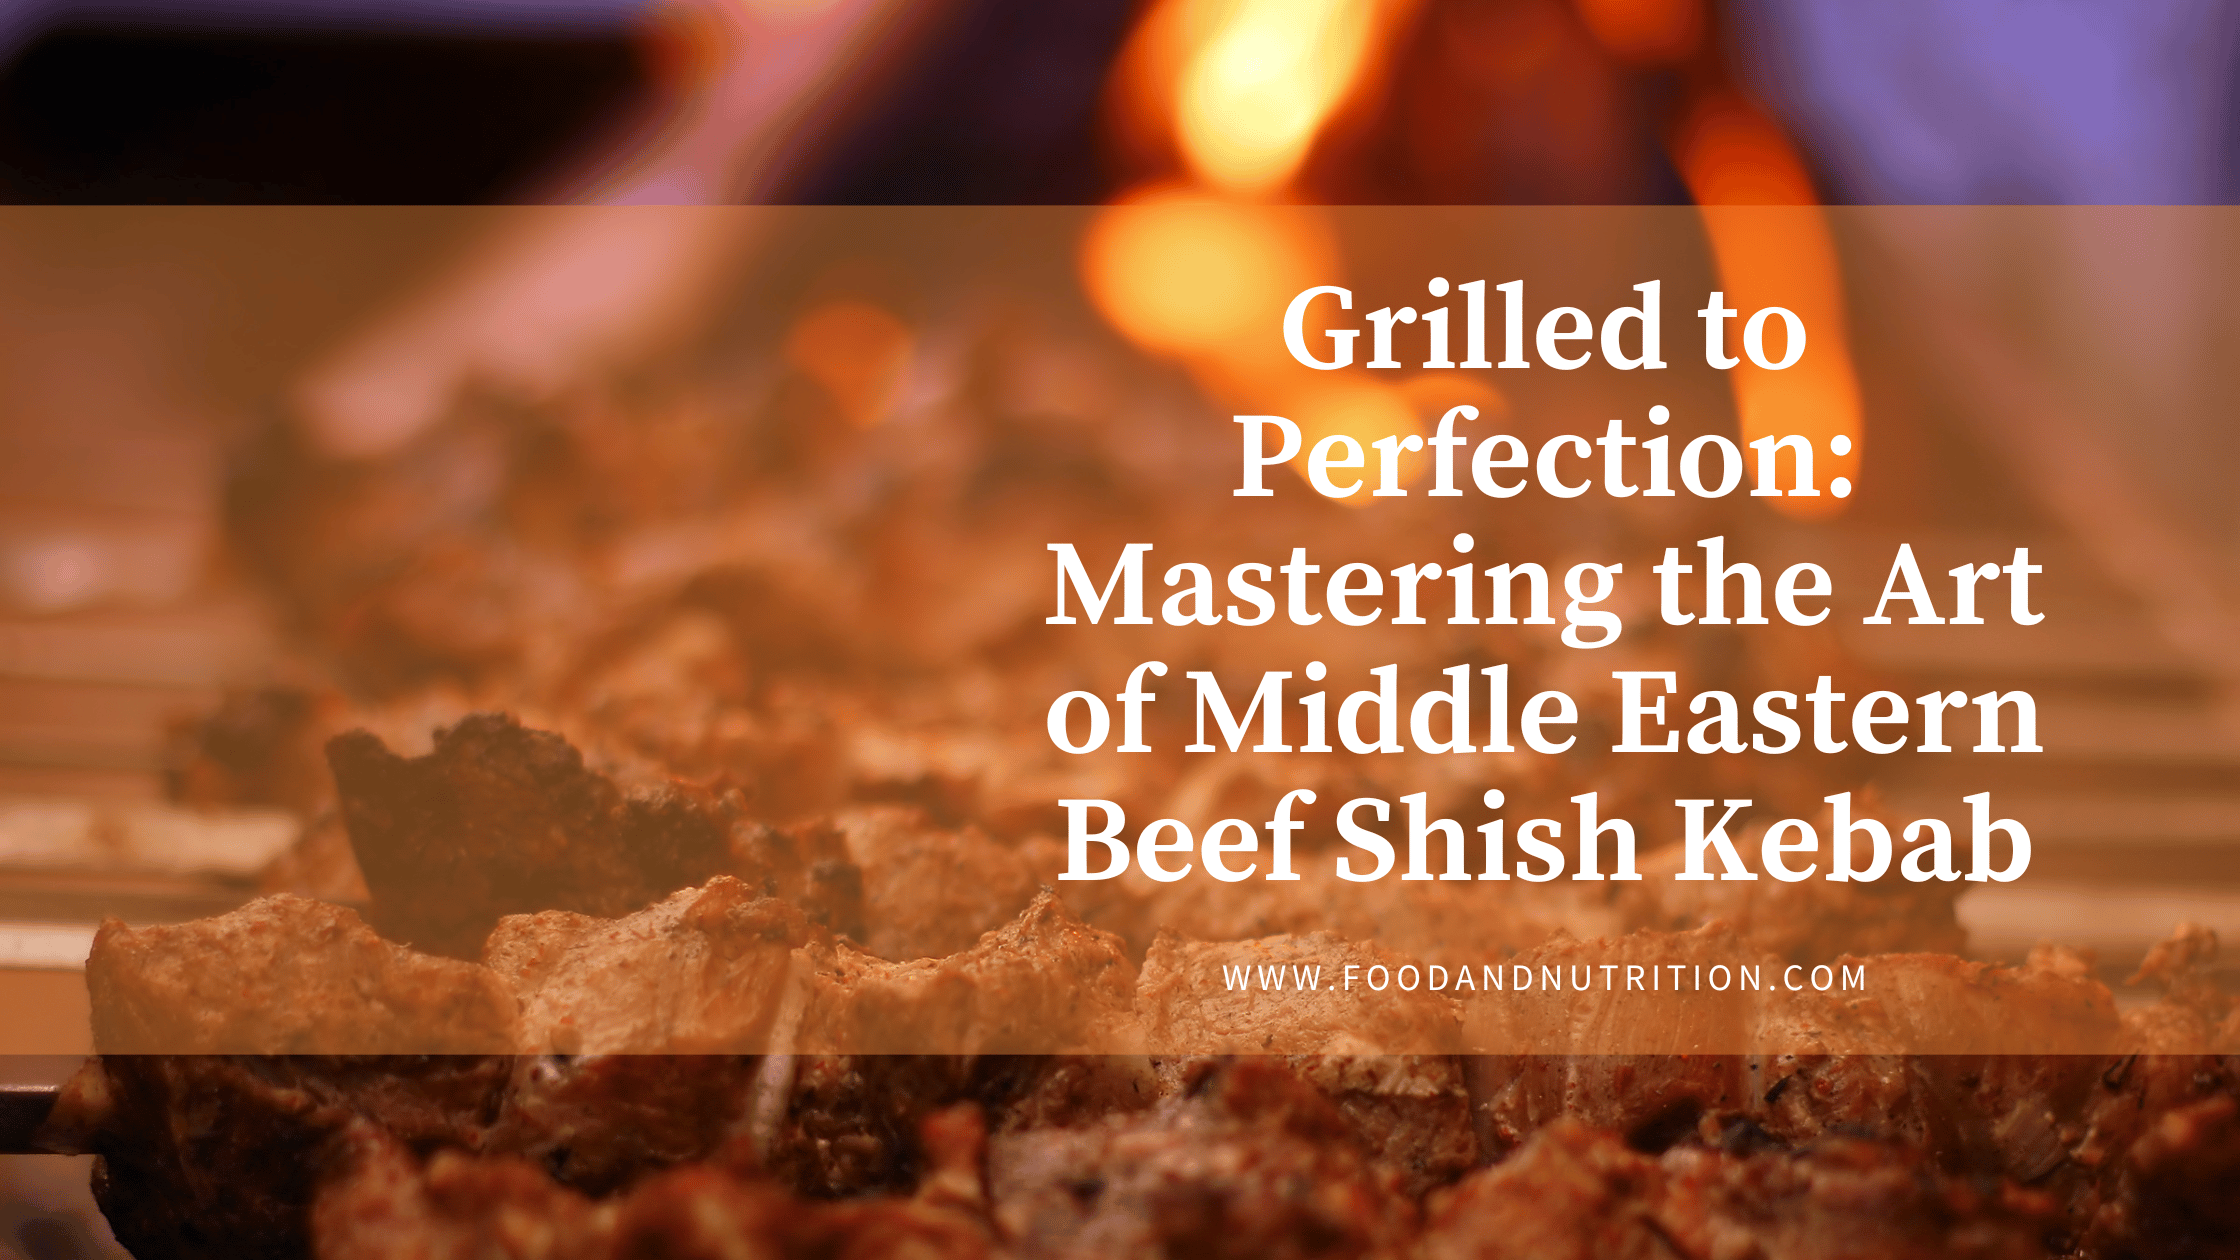 Grilled to Perfection: Mastering the Art of Middle Eastern Beef Shish Kebab